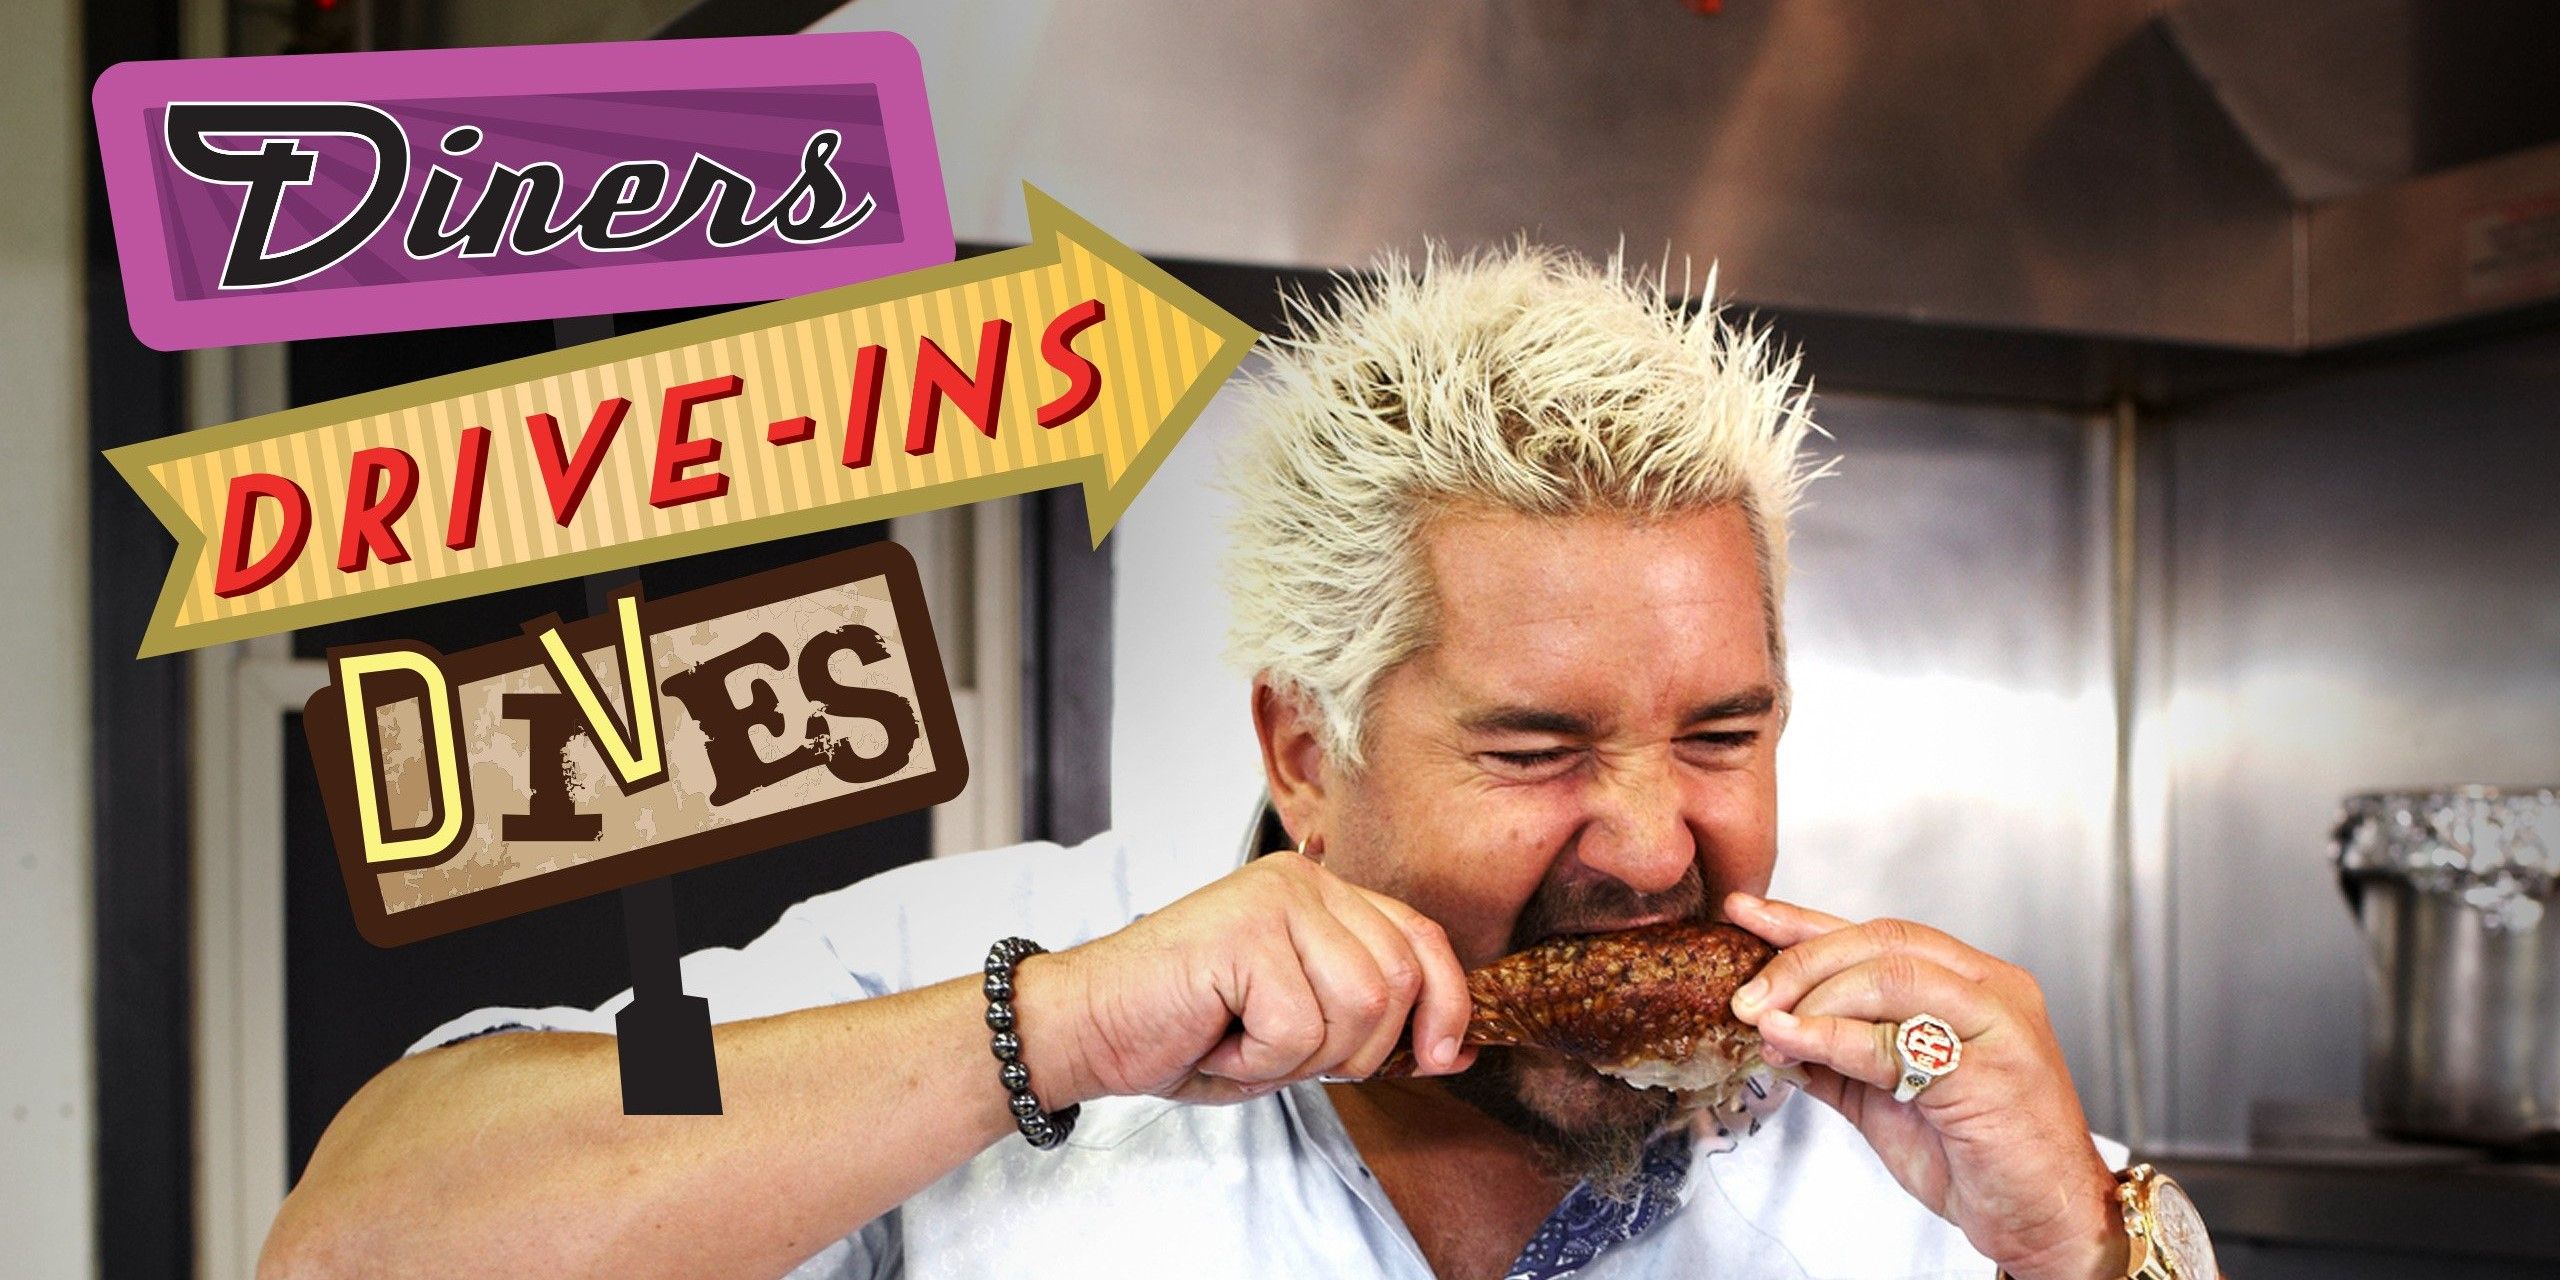 Guy Fieri eating with a logo above him